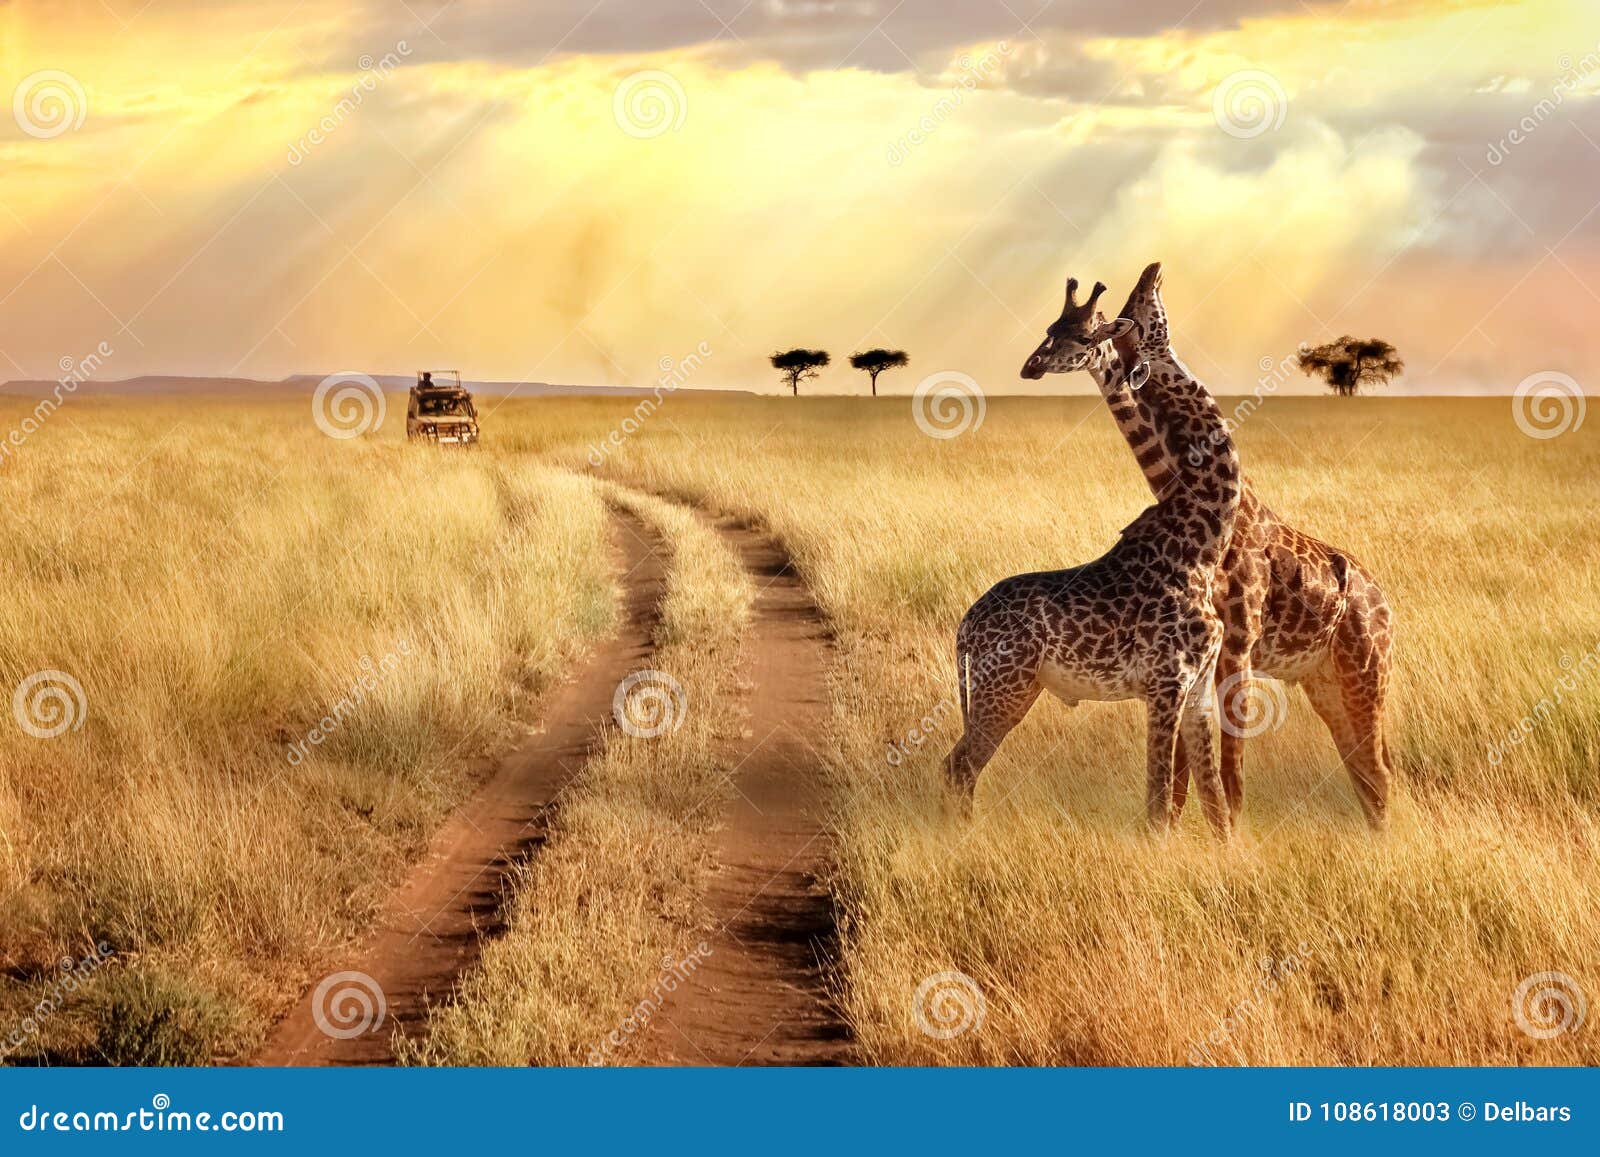 Group of Giraffes in the Serengeti National Park on a Sunset 